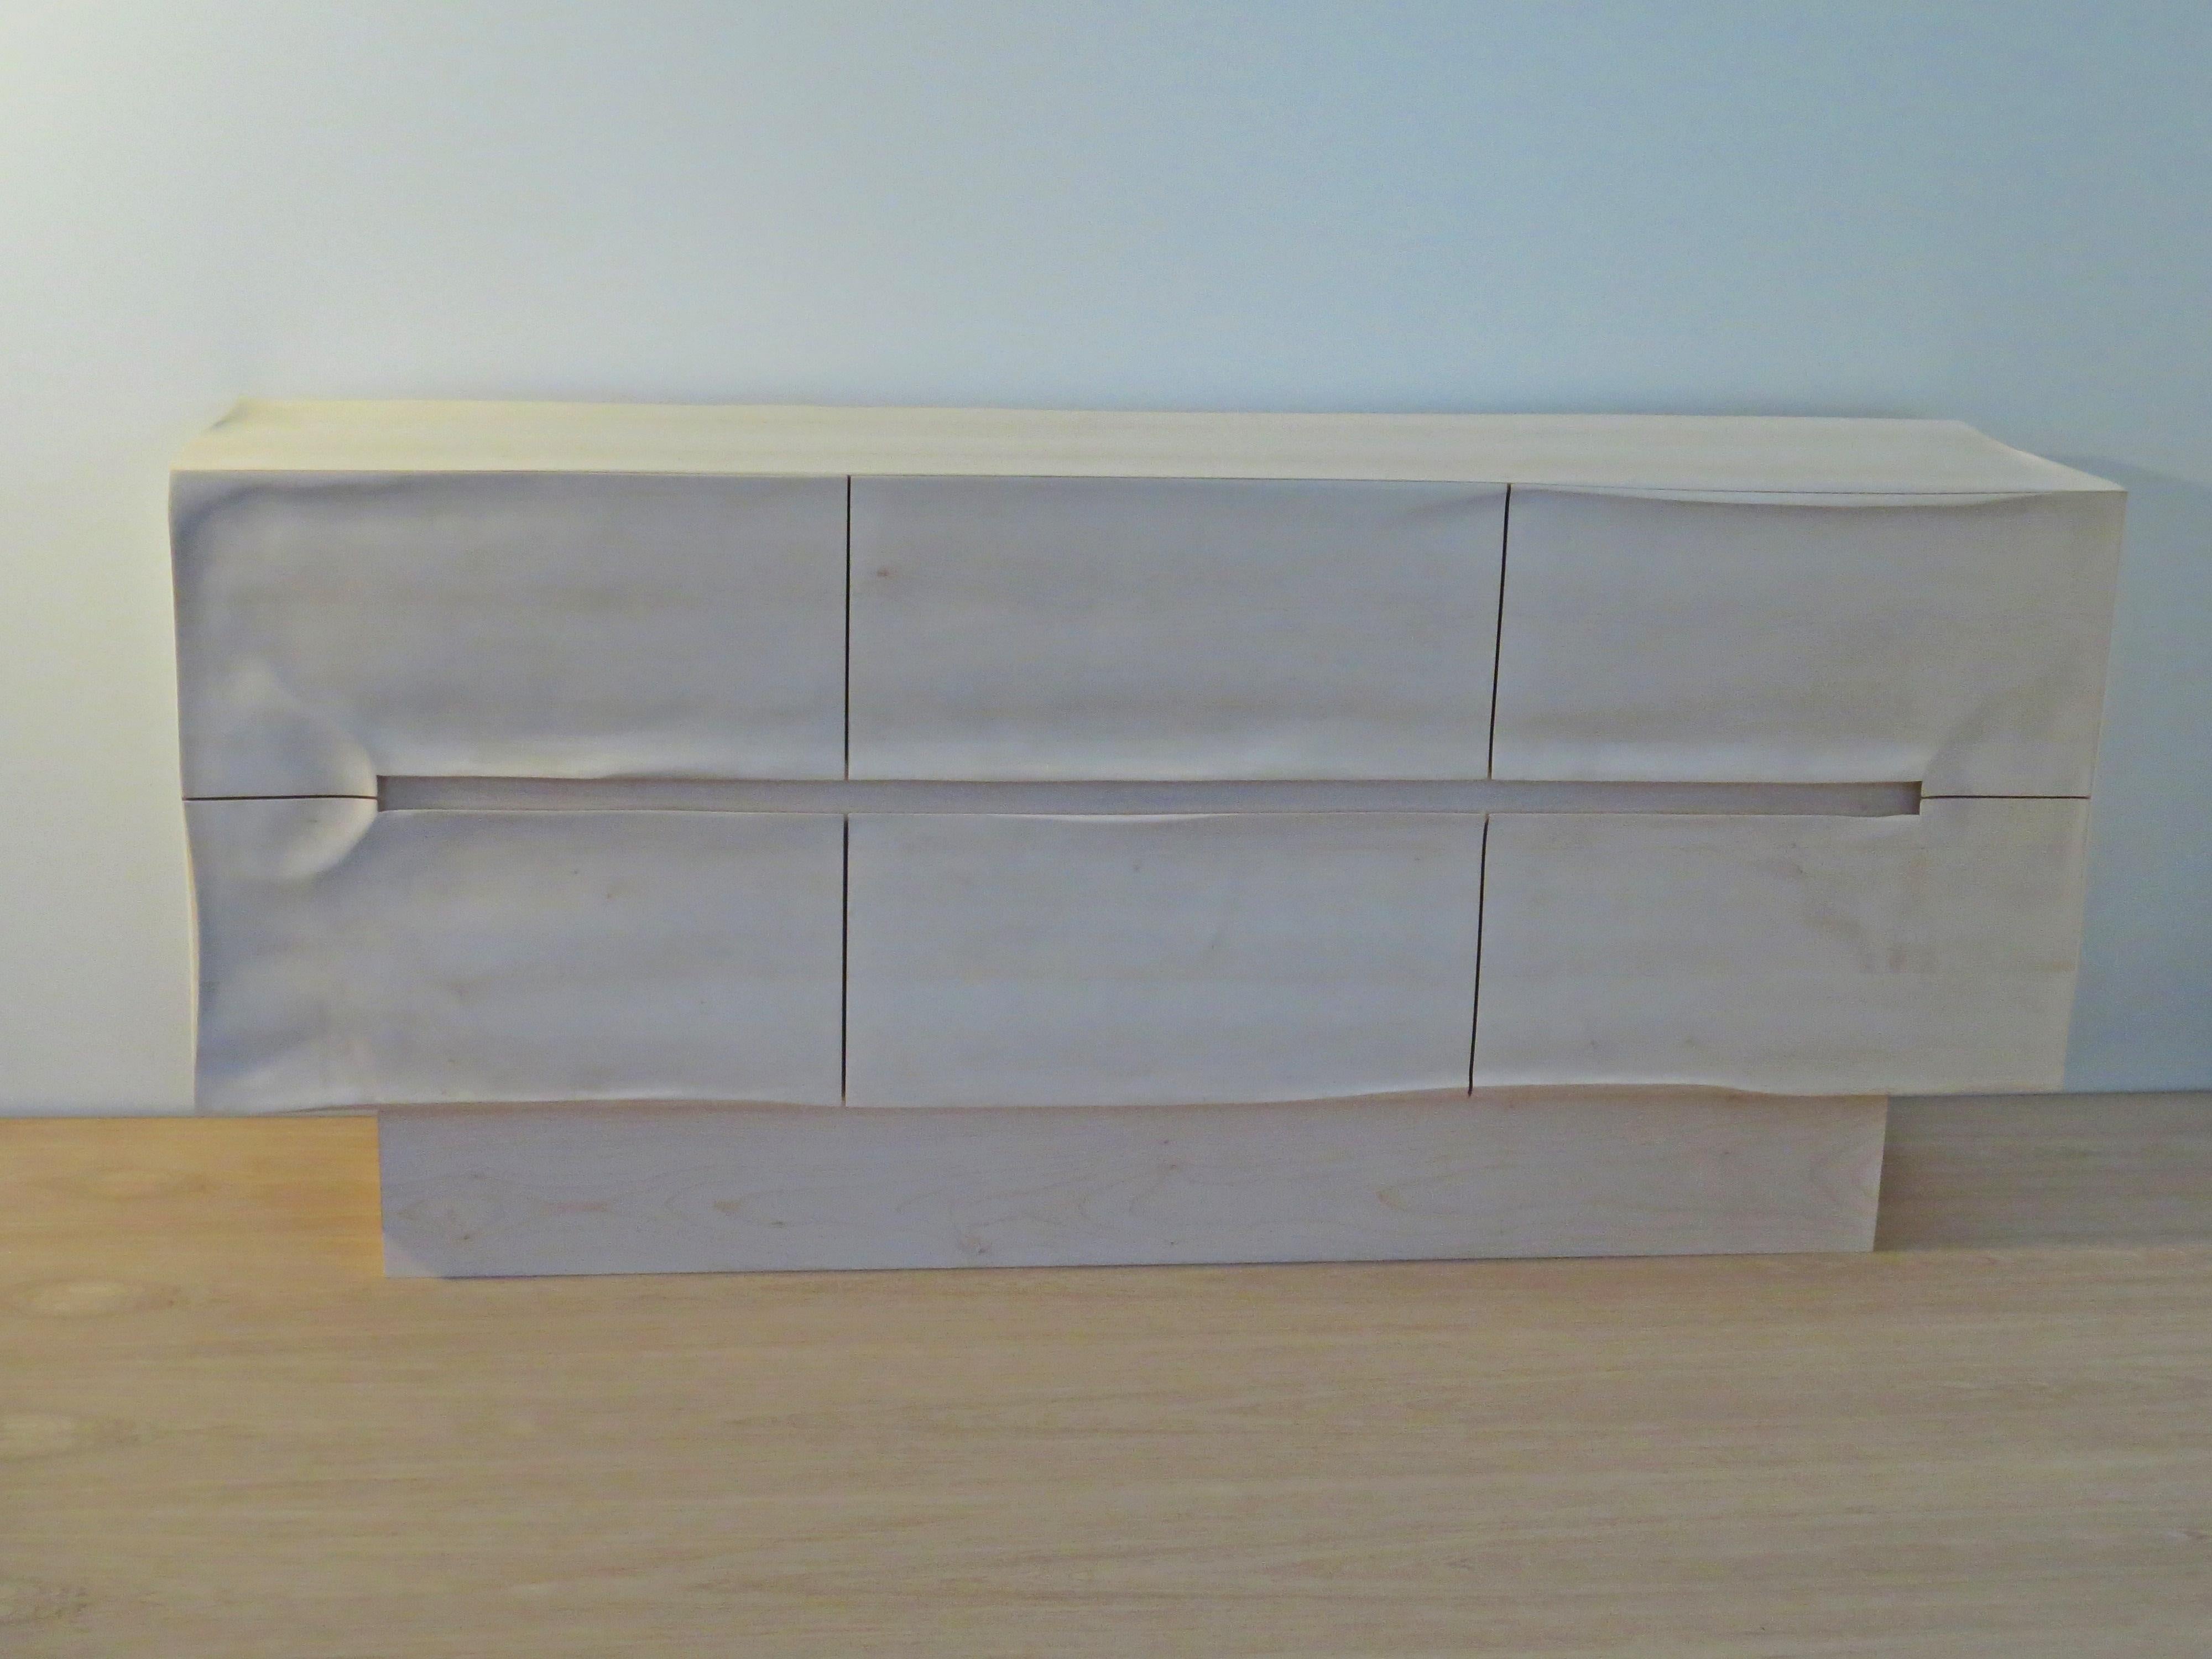 Sideboard Solid Wood in Organic Design, Handcrafted in Germany, sculptural  In New Condition For Sale In Dietmannsried, Bavaria